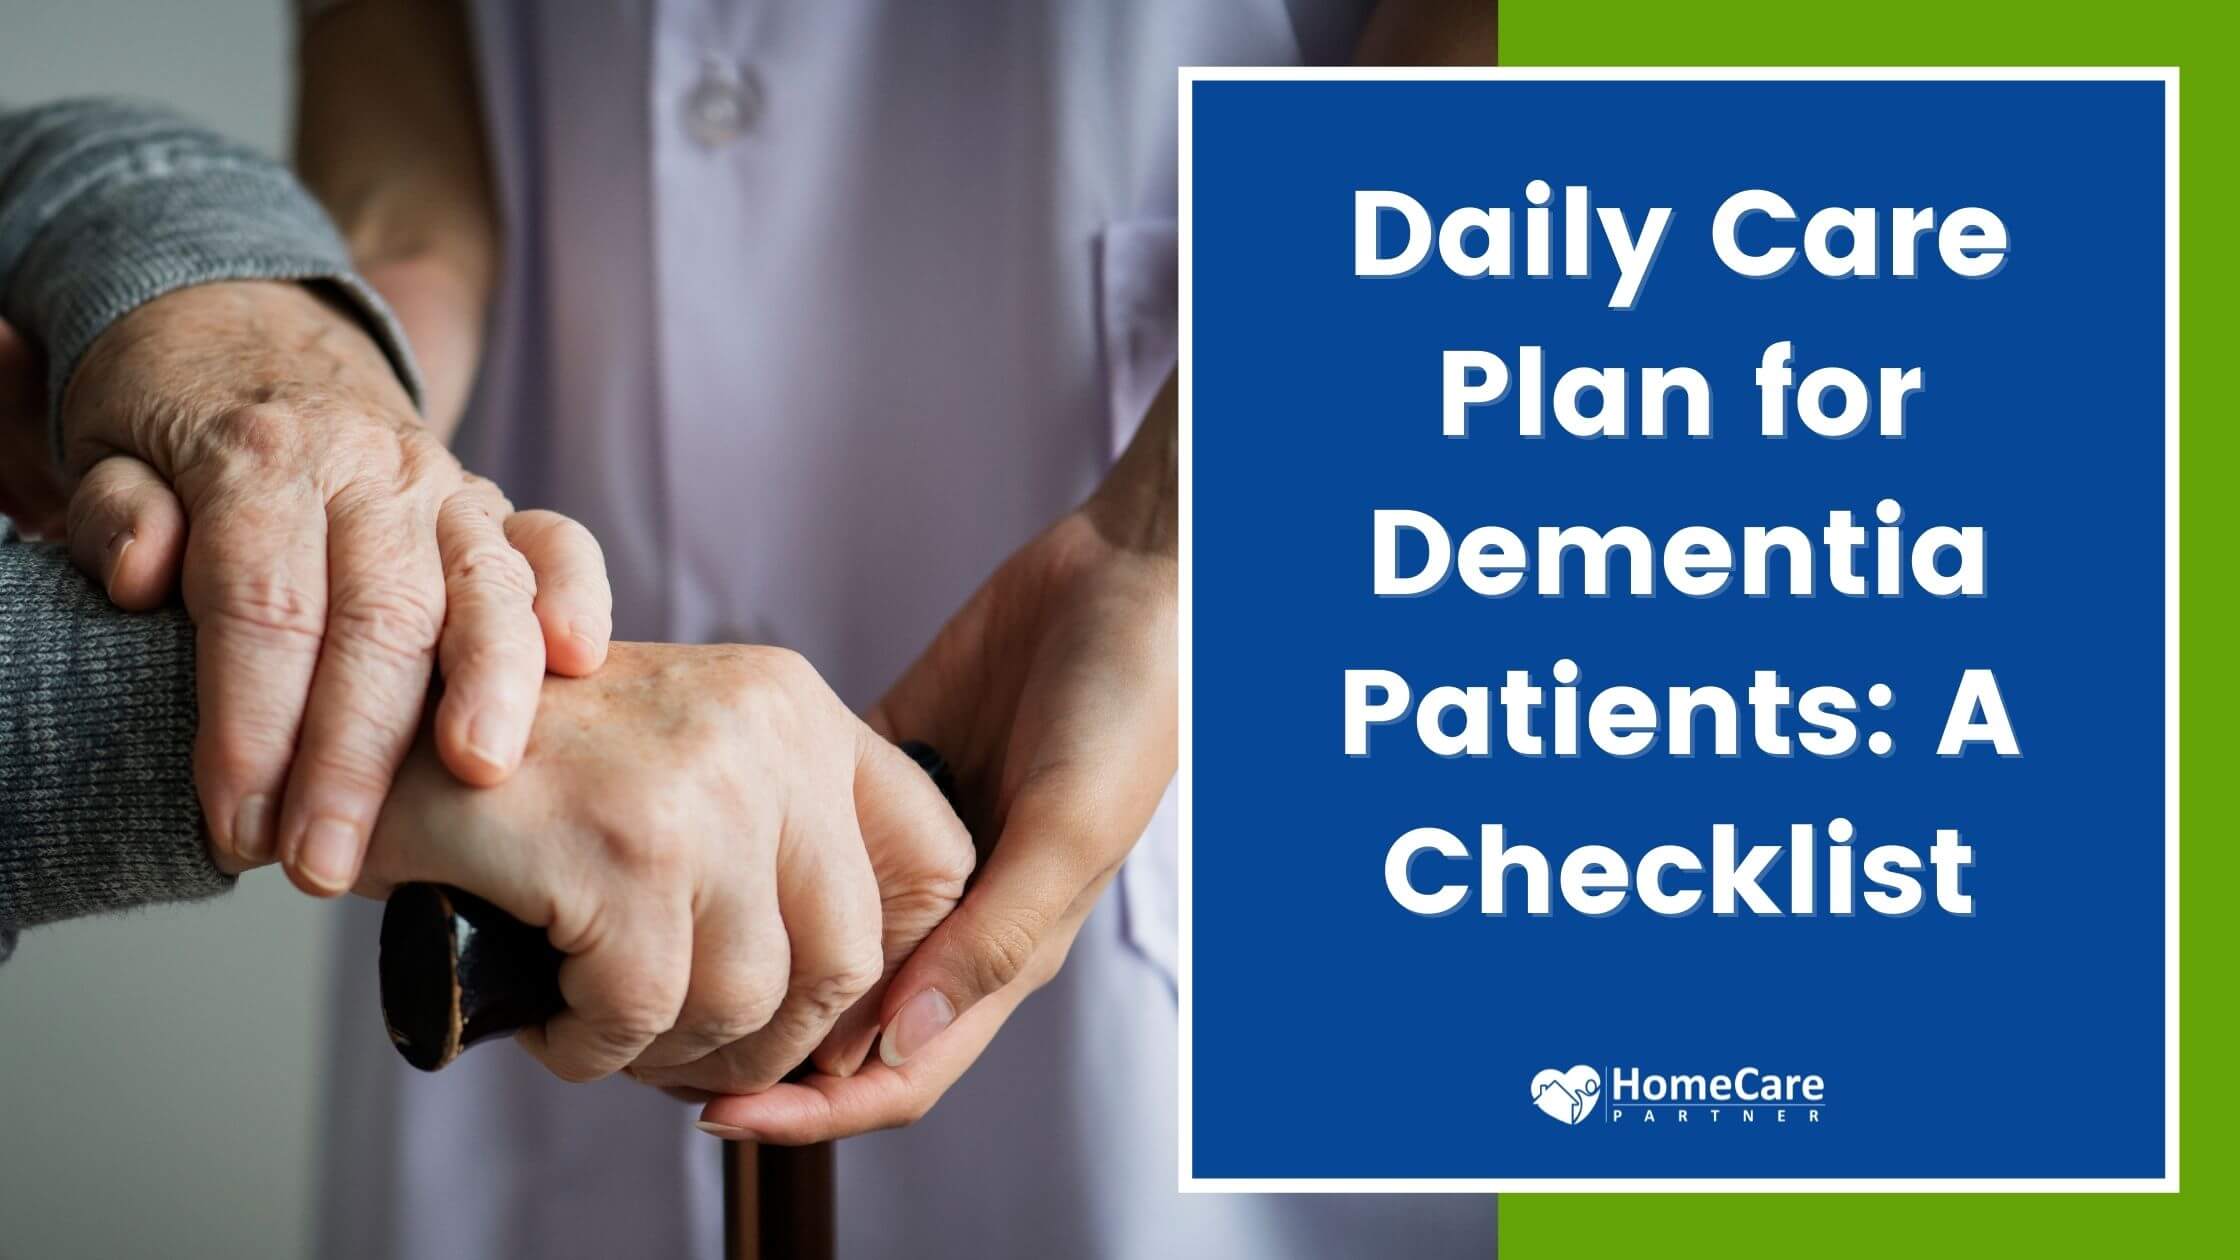 A Guide to Creating a Checklist and Daily Care Plan for Dementia Patients